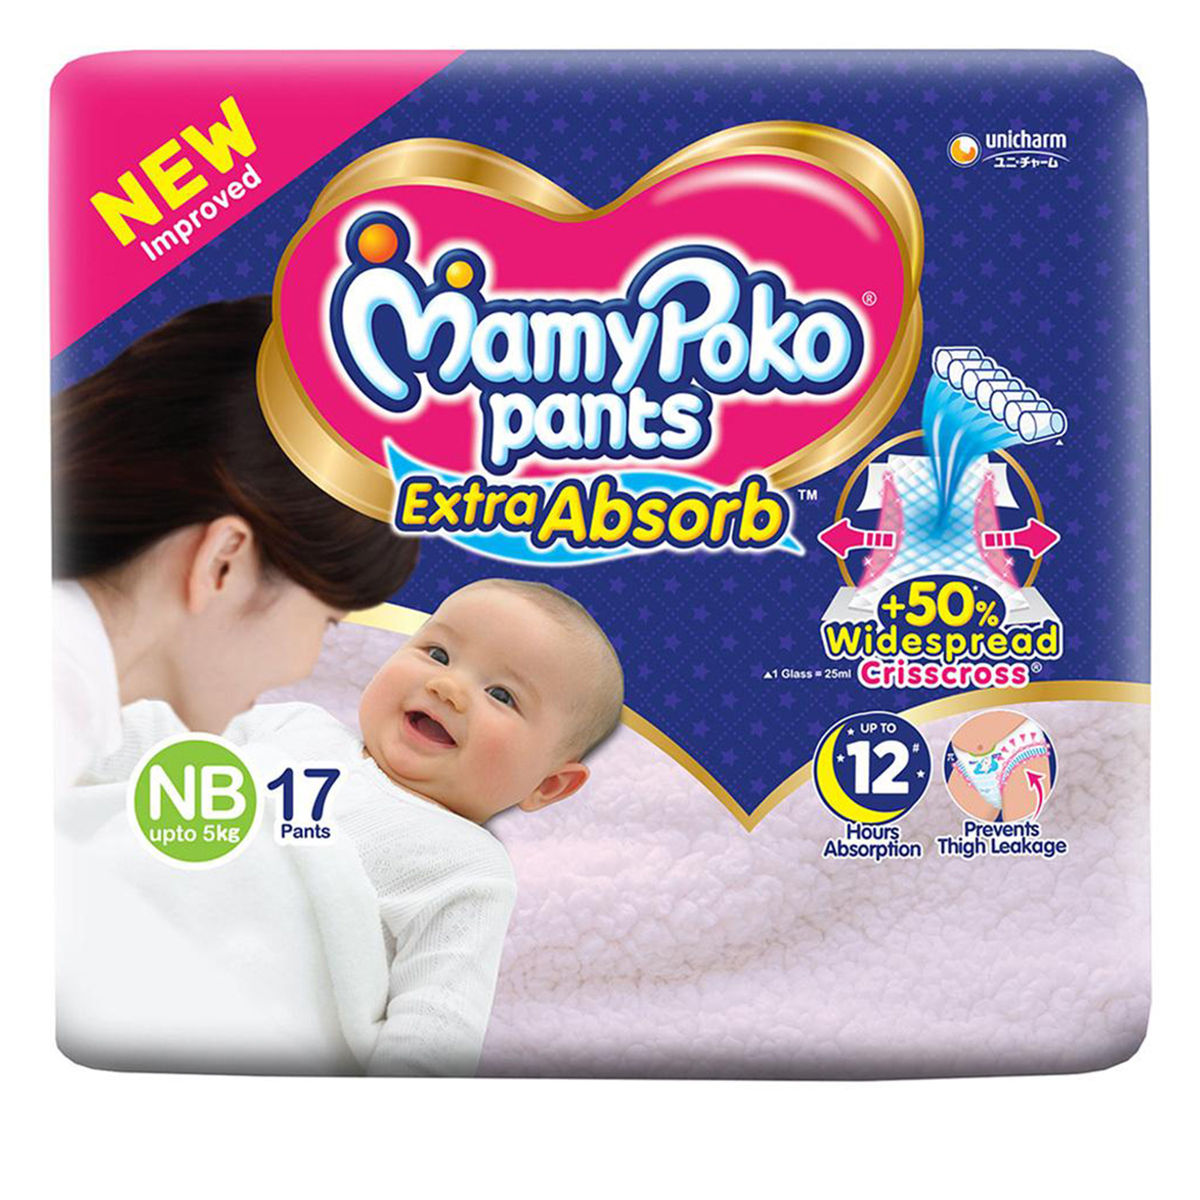 MamyPoko Extra Absorb Diaper - Extra large Size, Pack of 20 Diapers (XL-20)  - XL - Buy 20 MamyPoko Pant Diapers | Shopsy.in